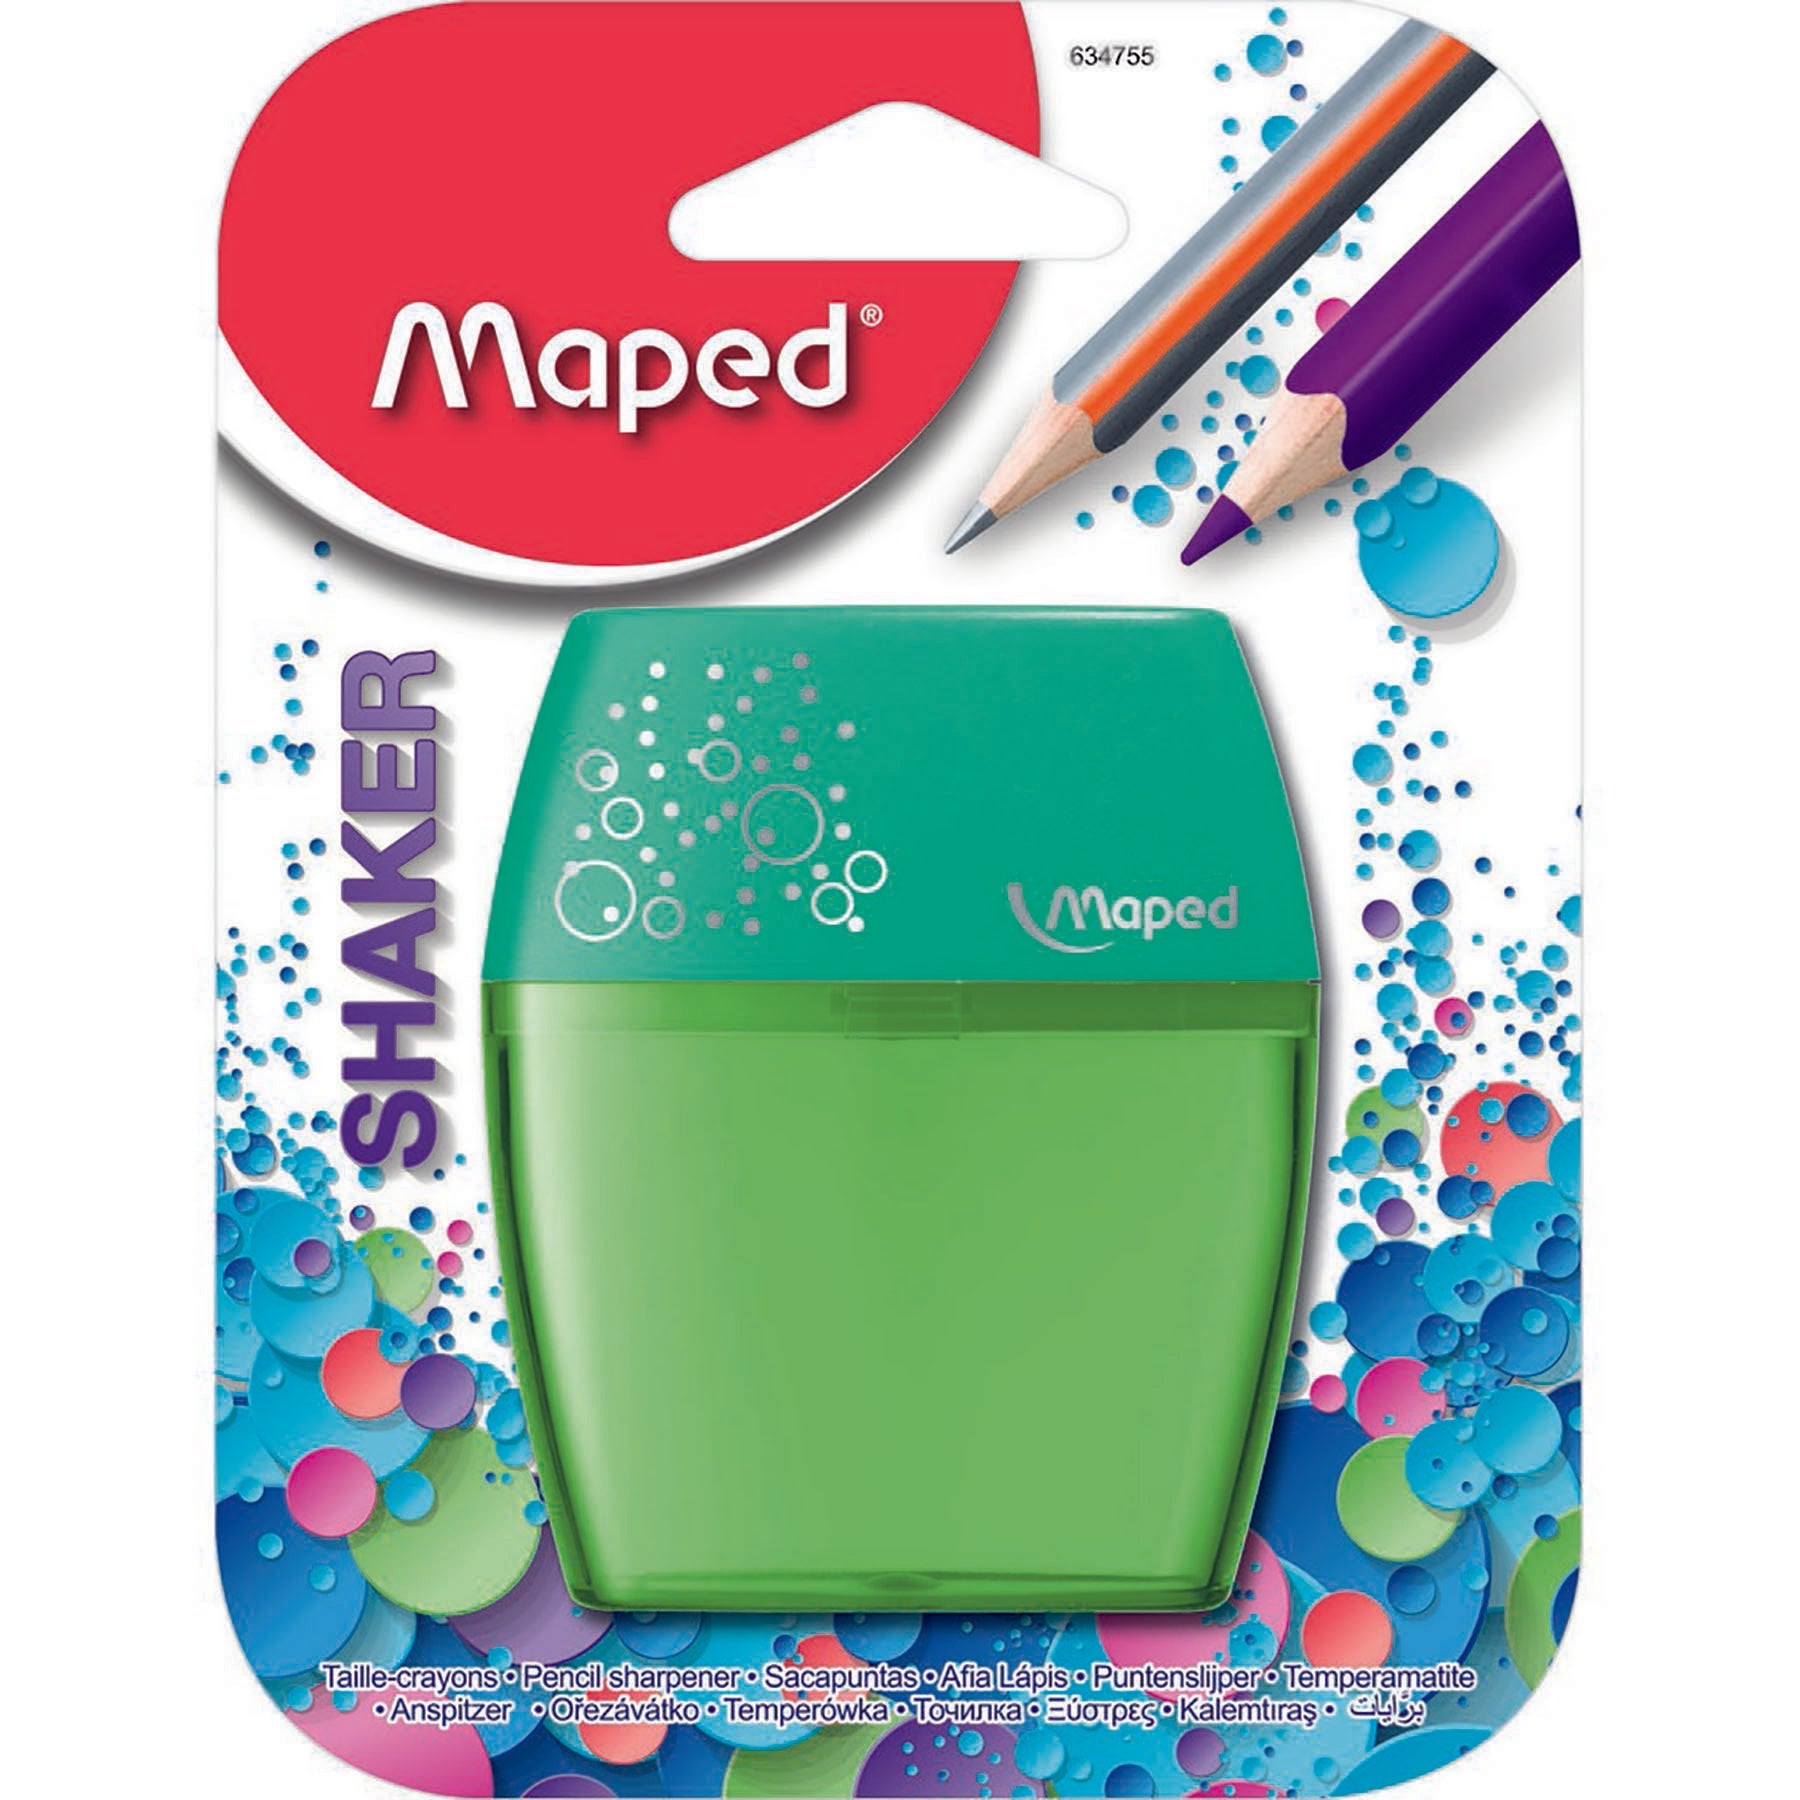 Maped Pencil Sharpener 2 Holes 2.75x2.4in